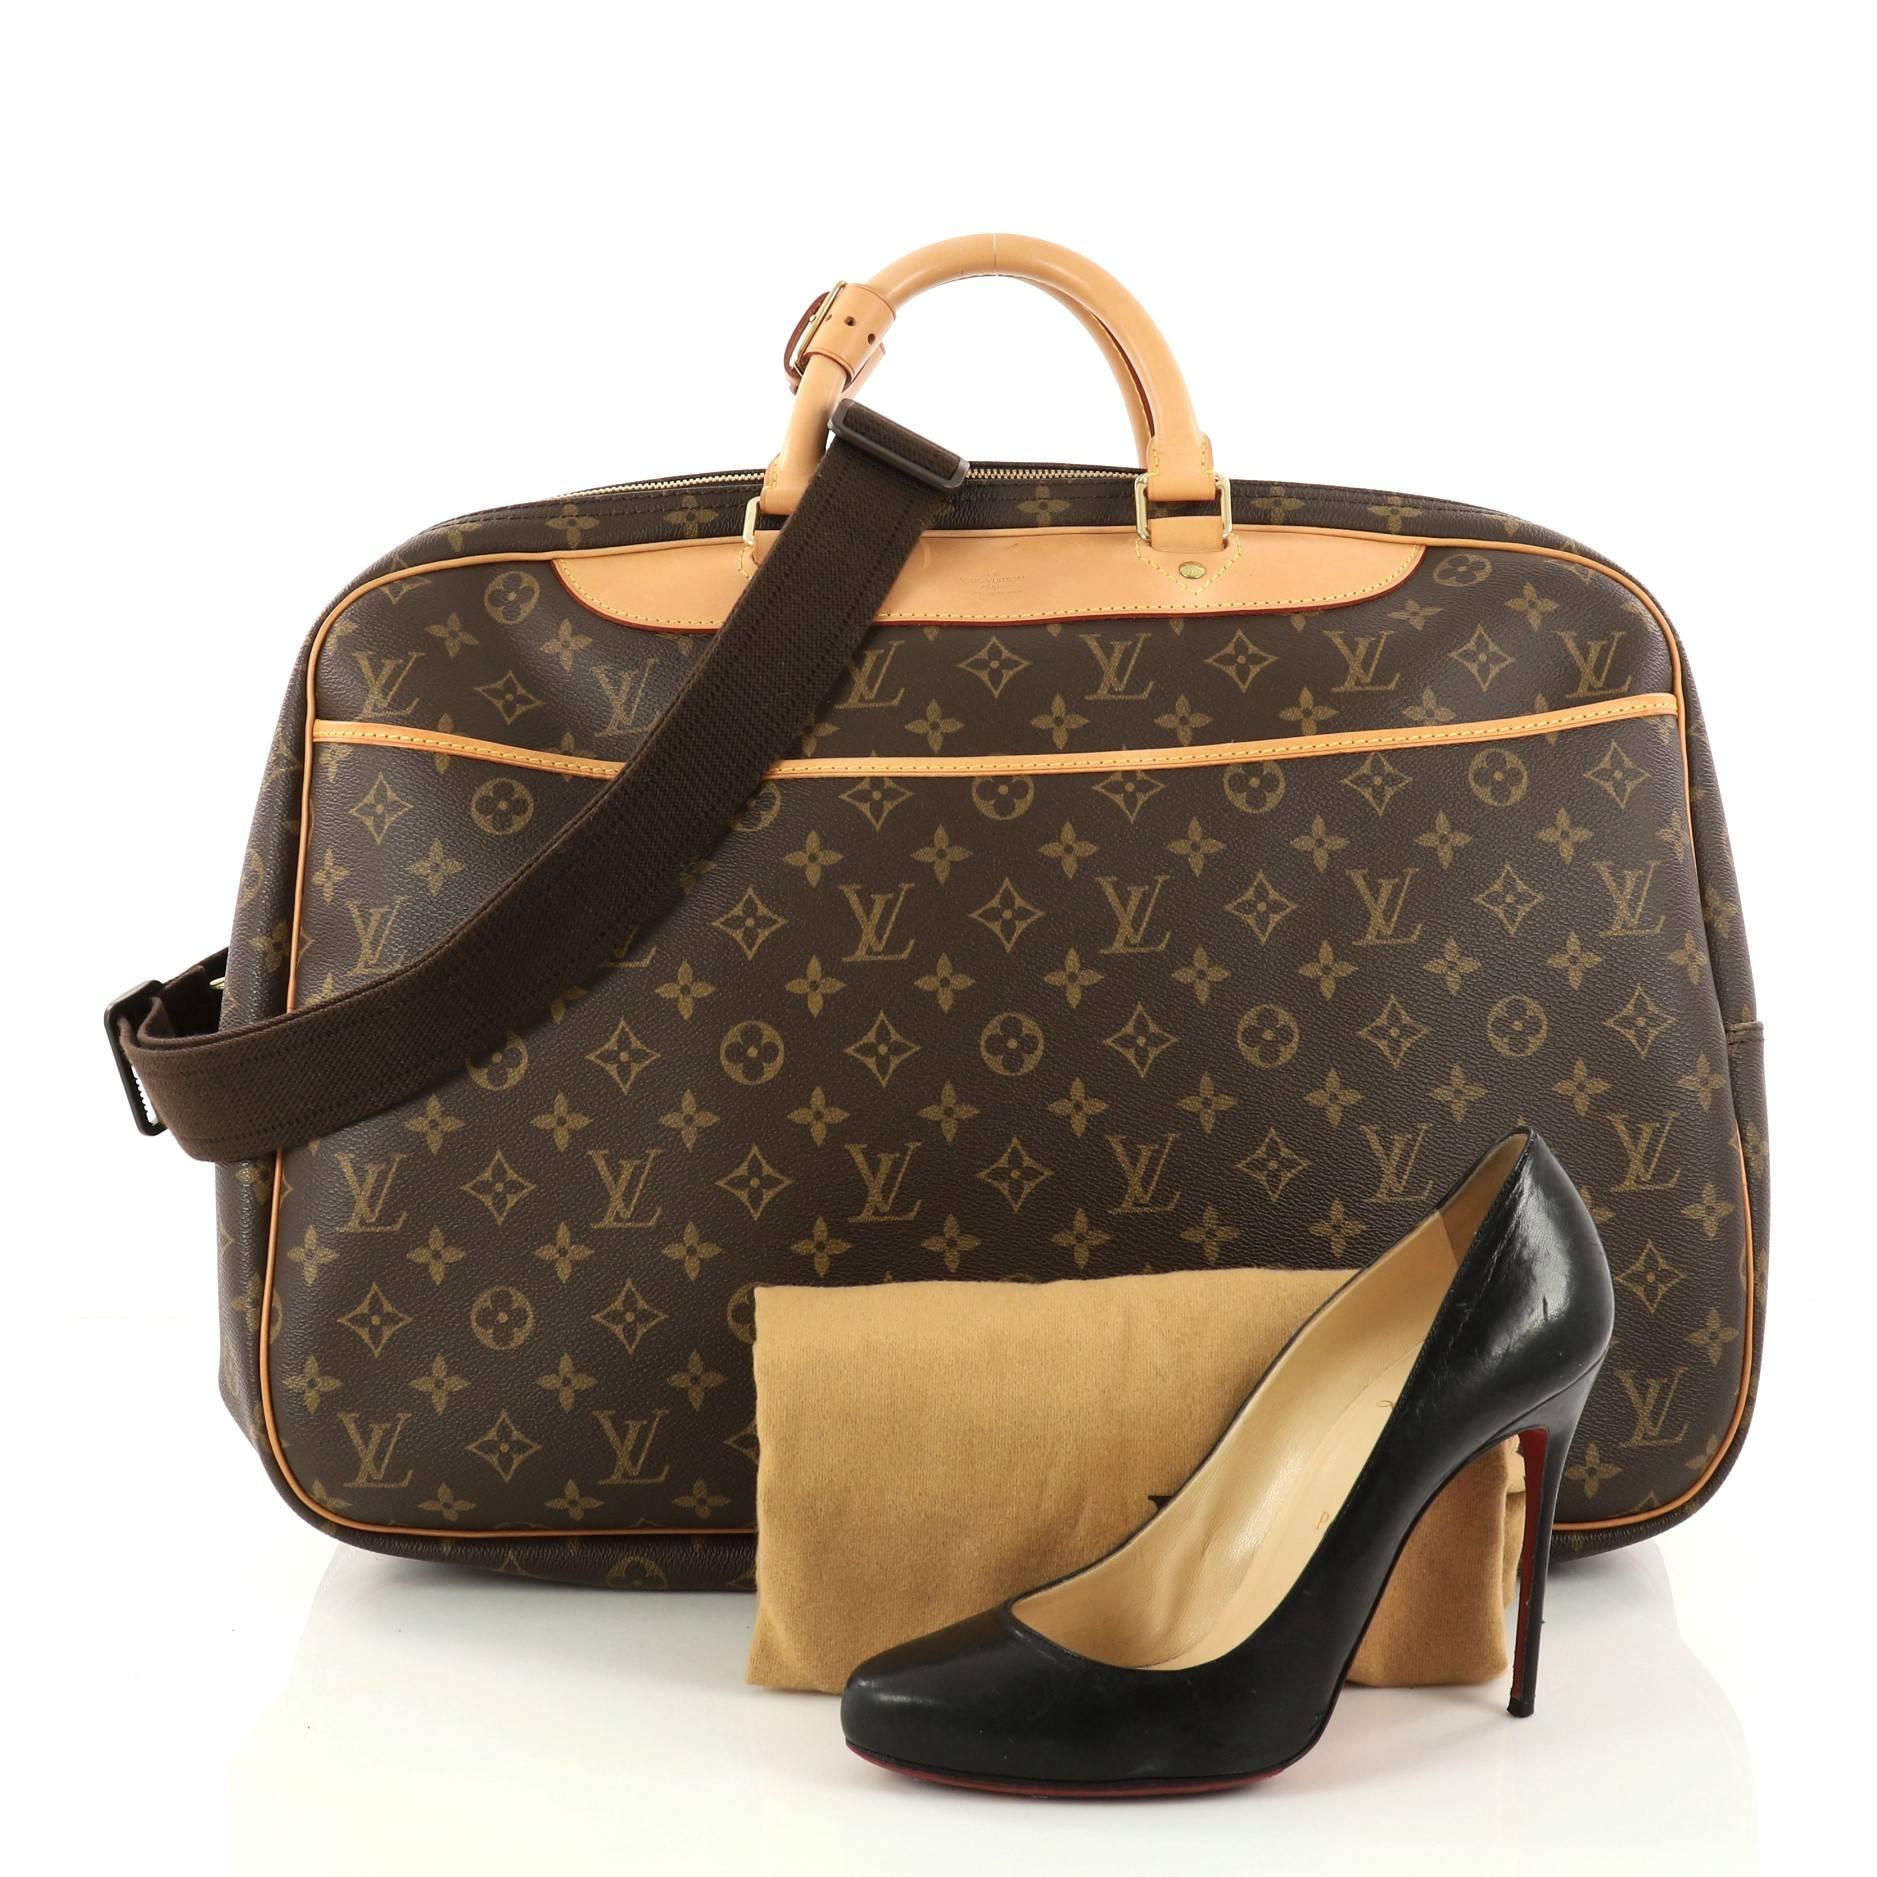 This authentic Louis Vuitton Alize Bag Monogram Canvas 2 Poches is your luxurious companion made for travels and weekend getaways. Crafted in Louis Vuitton's iconic brown monogram coated canvas with vachetta handles and trims, this soft suitcase